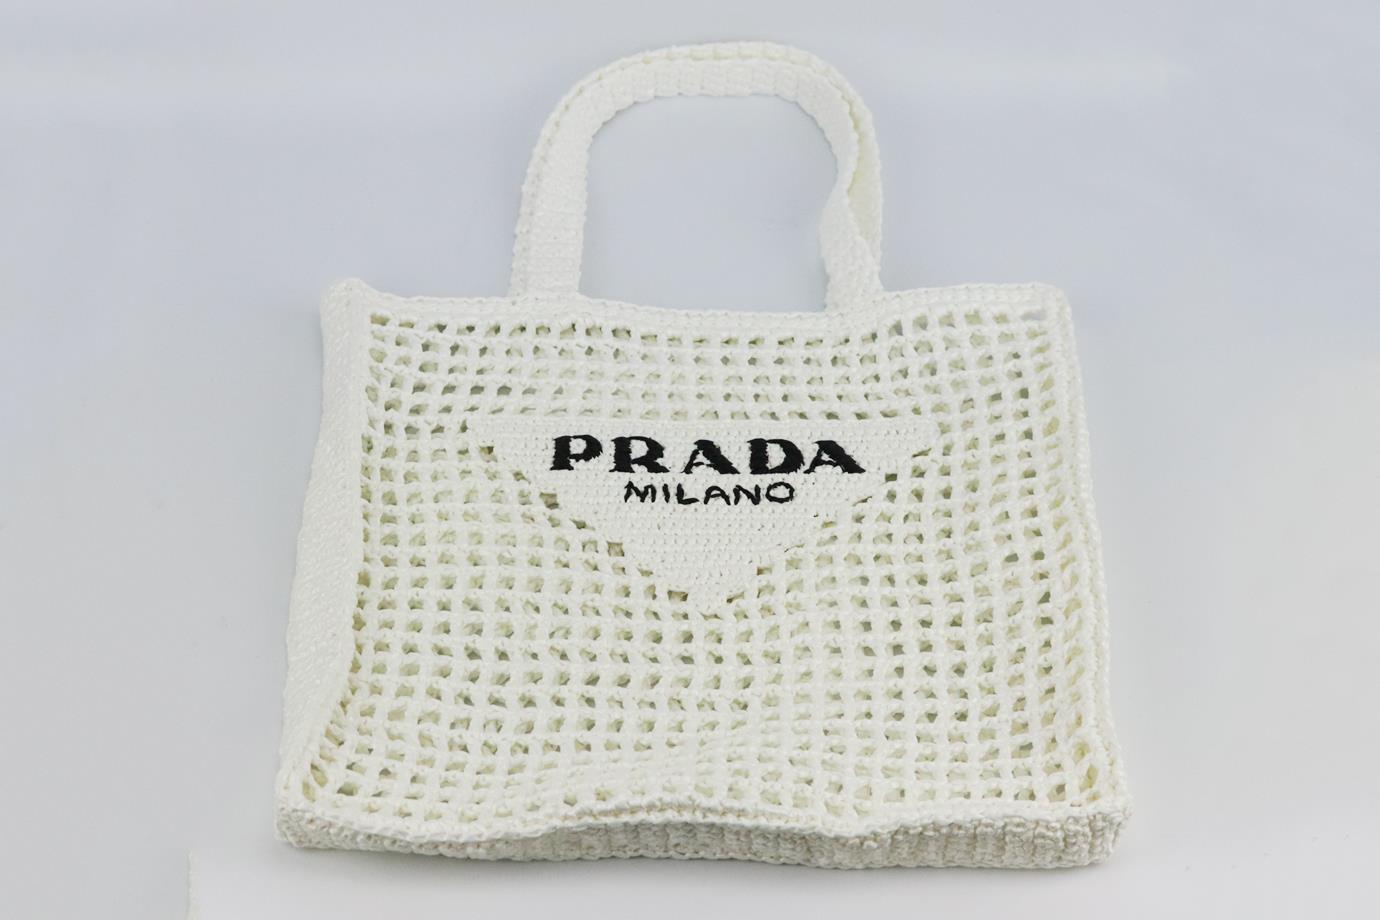 Prada logo embroidered raffia tote bag. Made from white cutout raffia with logo embroidery in black at the front. White and black. Open top. Comes with dustbag and authenticity card. Width: 14.5 in. Height: 15 in. Depth: 1.5 in. Handle Drop: 9 in
